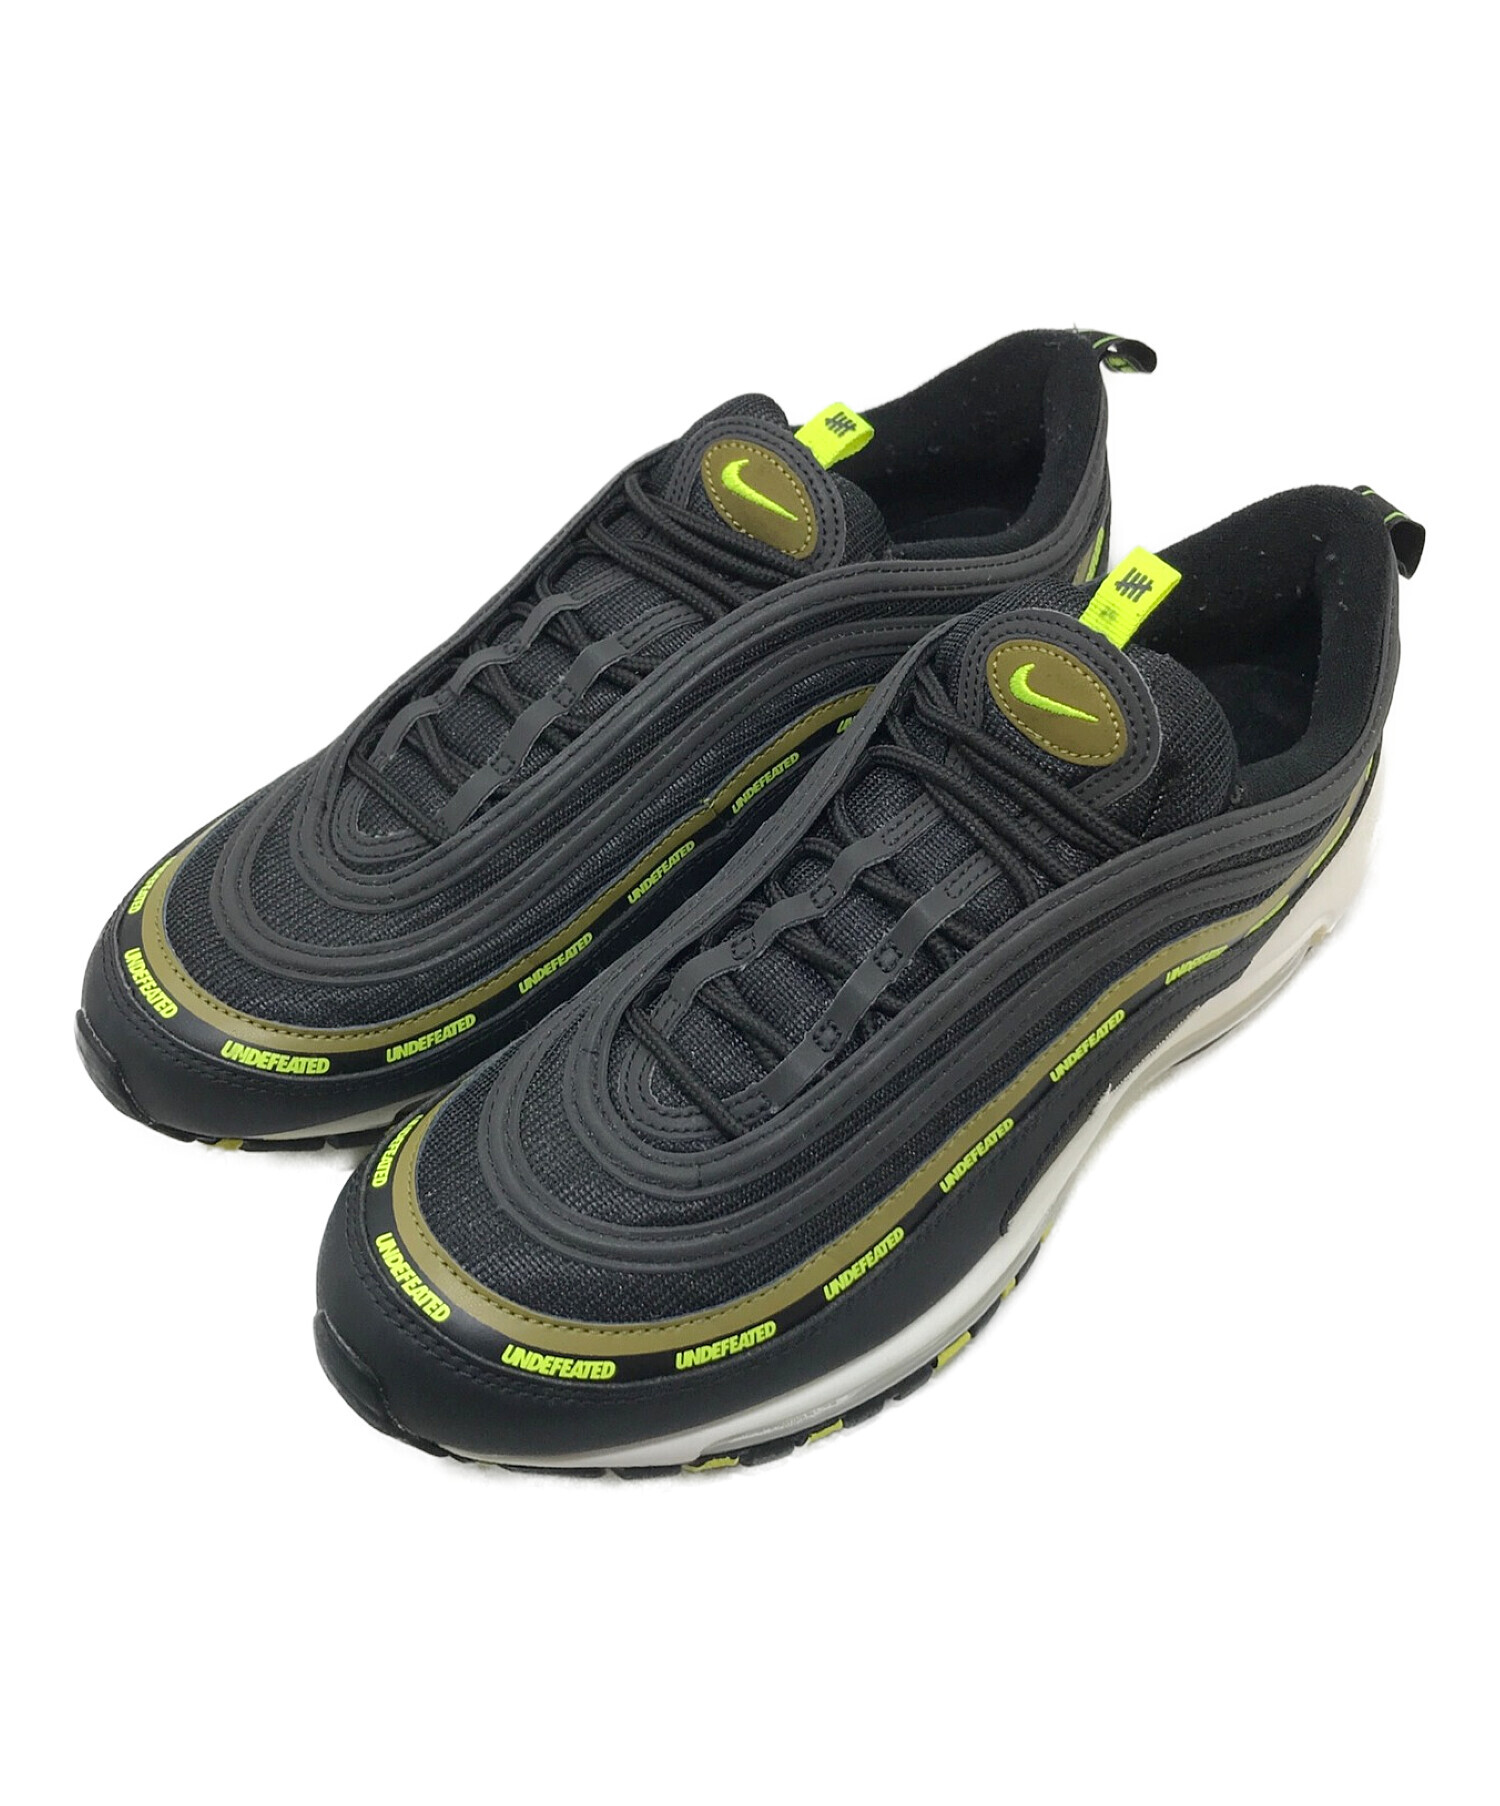 Nike Air Max 97 undefeated DC4830-001